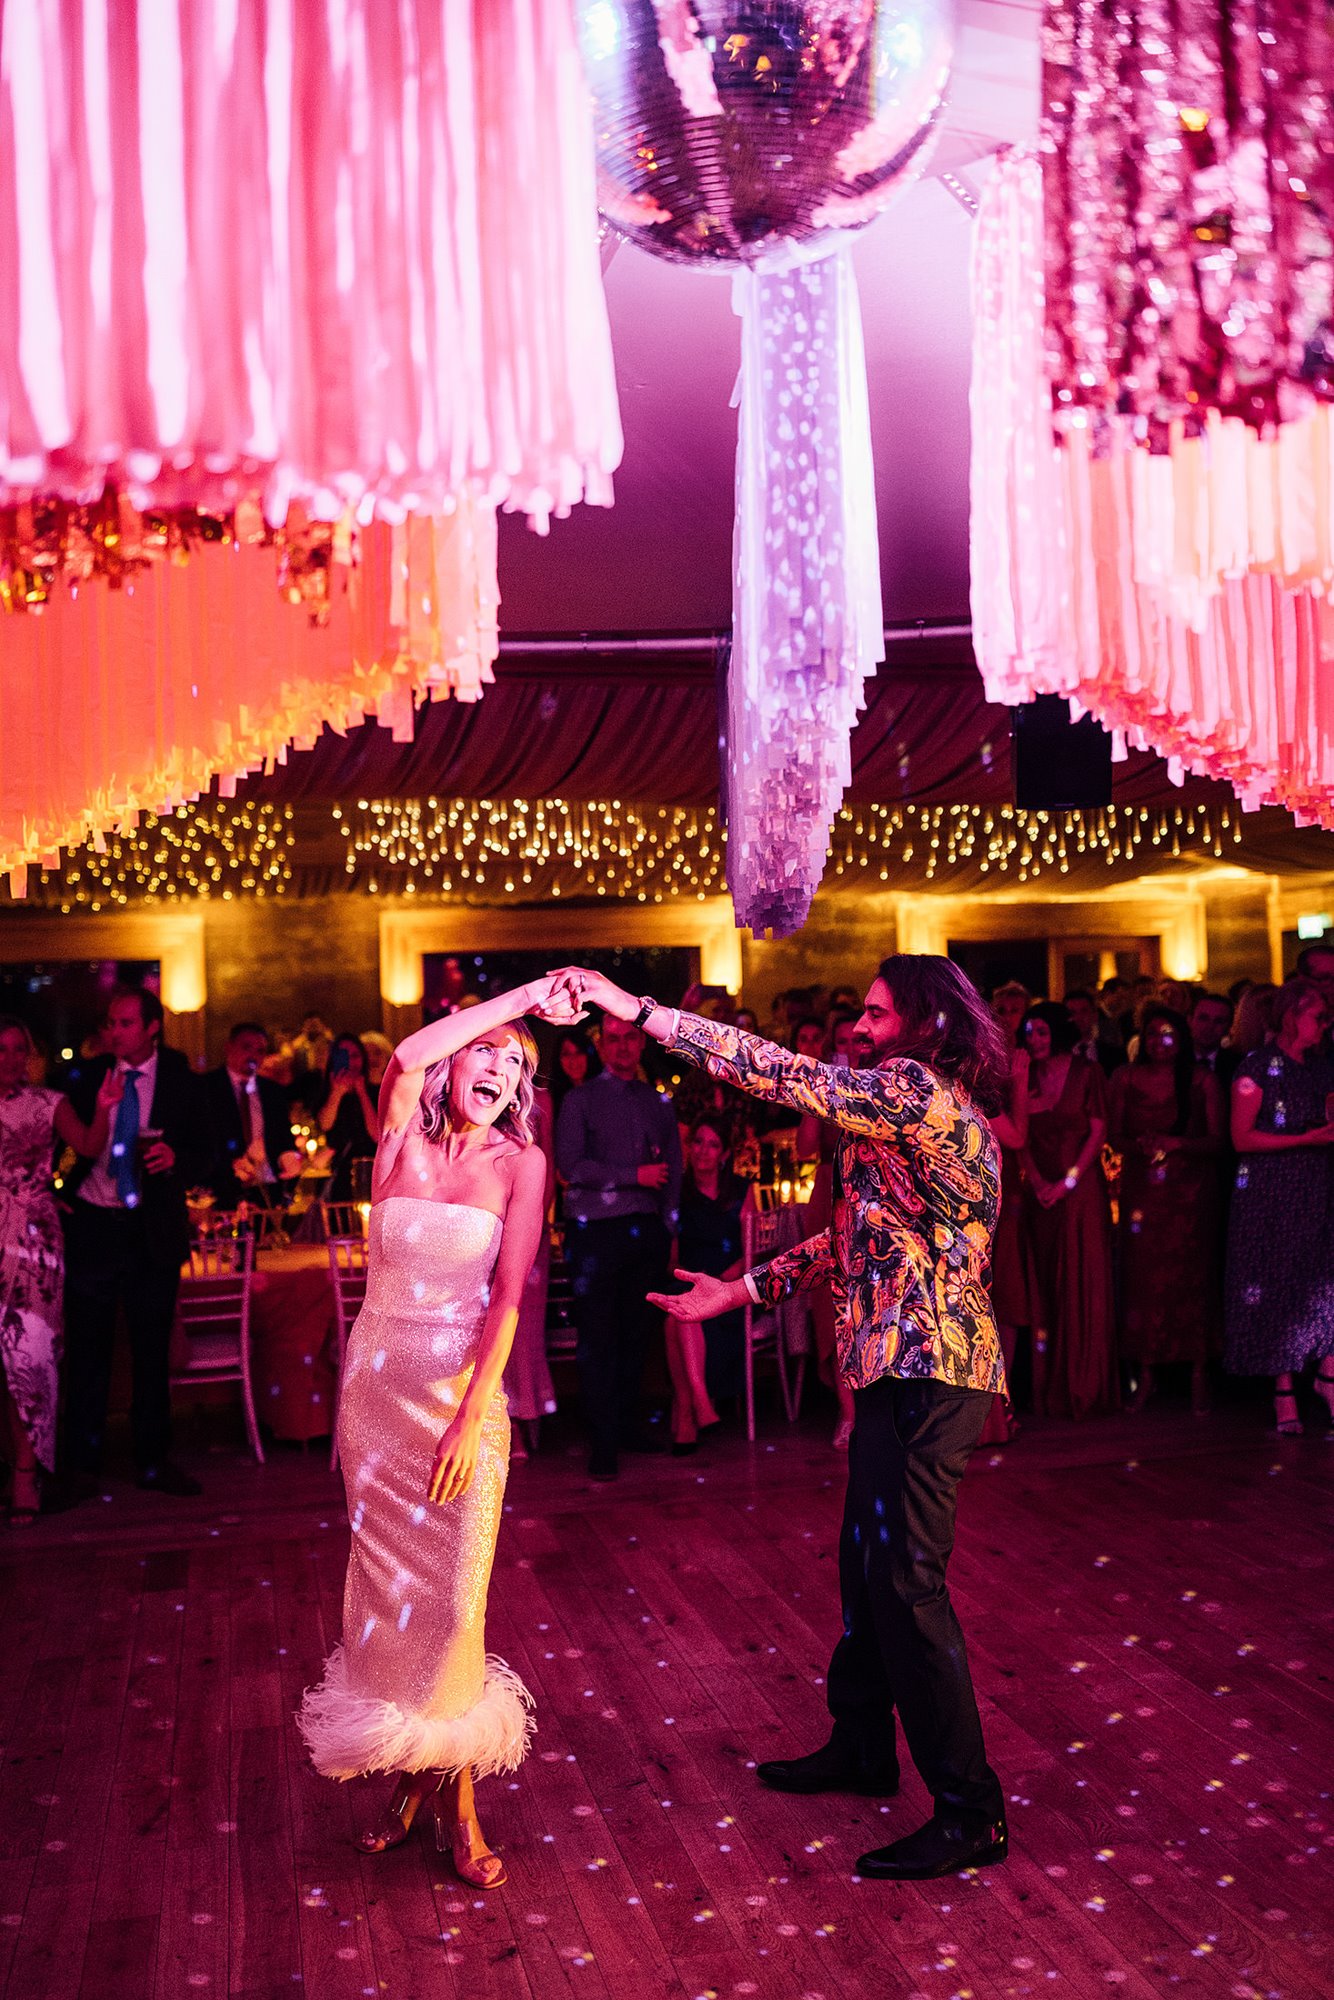 Retro disco wedding first dance with couple dressed in cool party outfits and streamers and disco ball